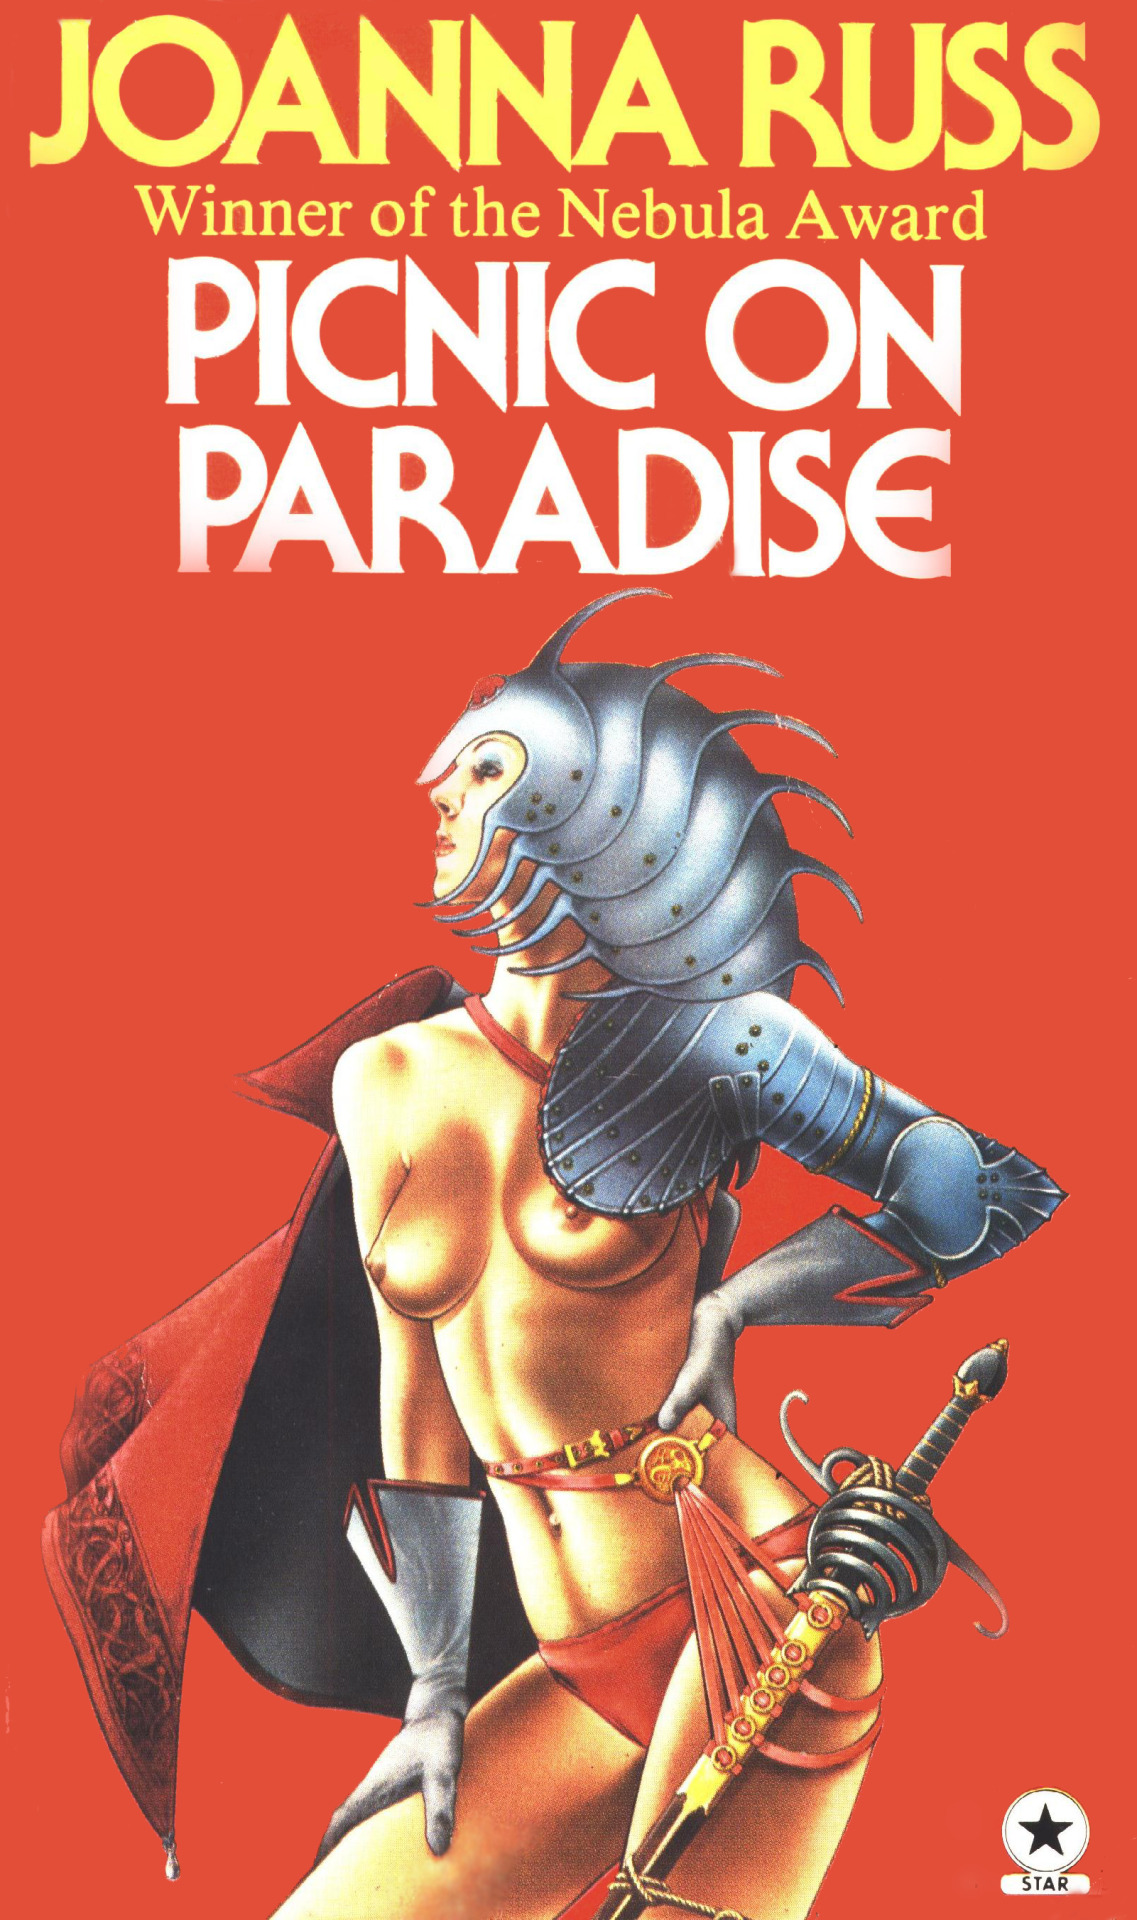 Here is a cover of Joanna Russ&rsquo;s first novel Picnic On Paradise (1968)